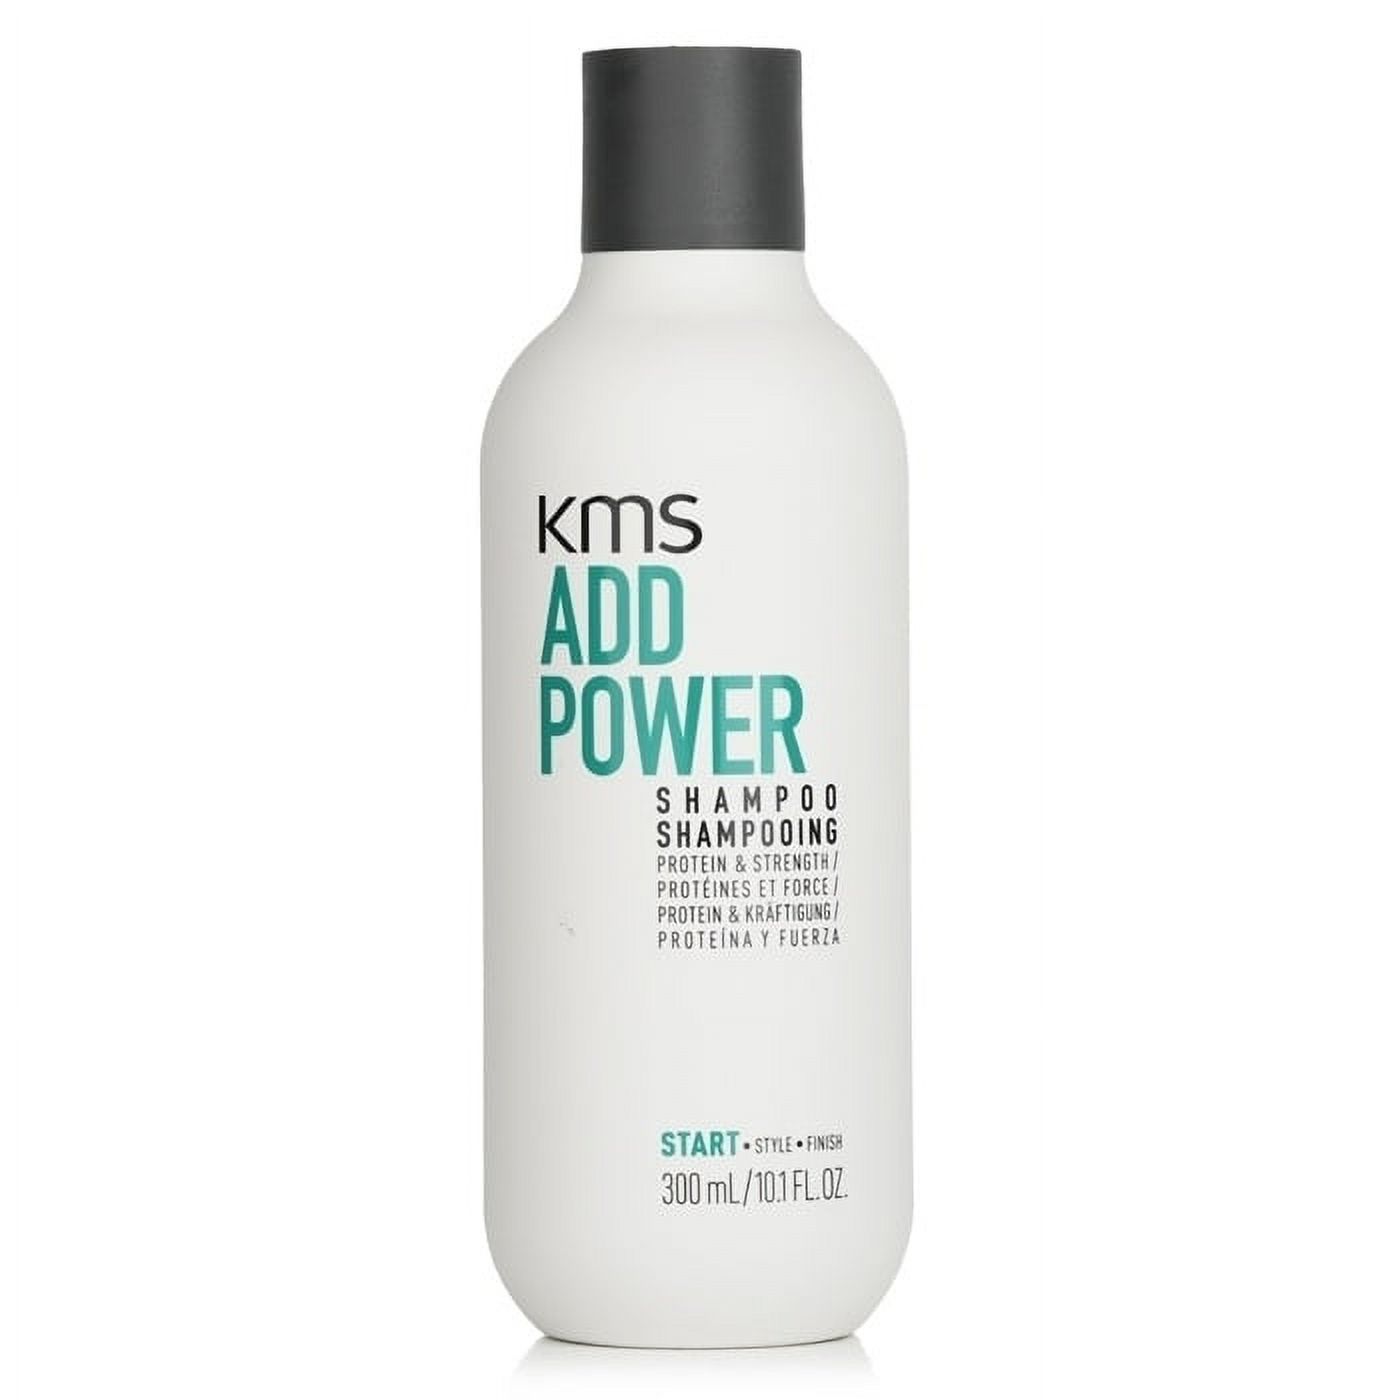 KMS California Add Power Shampoo (Protein and Strength) 300ml/10.1oz - image 1 of 3